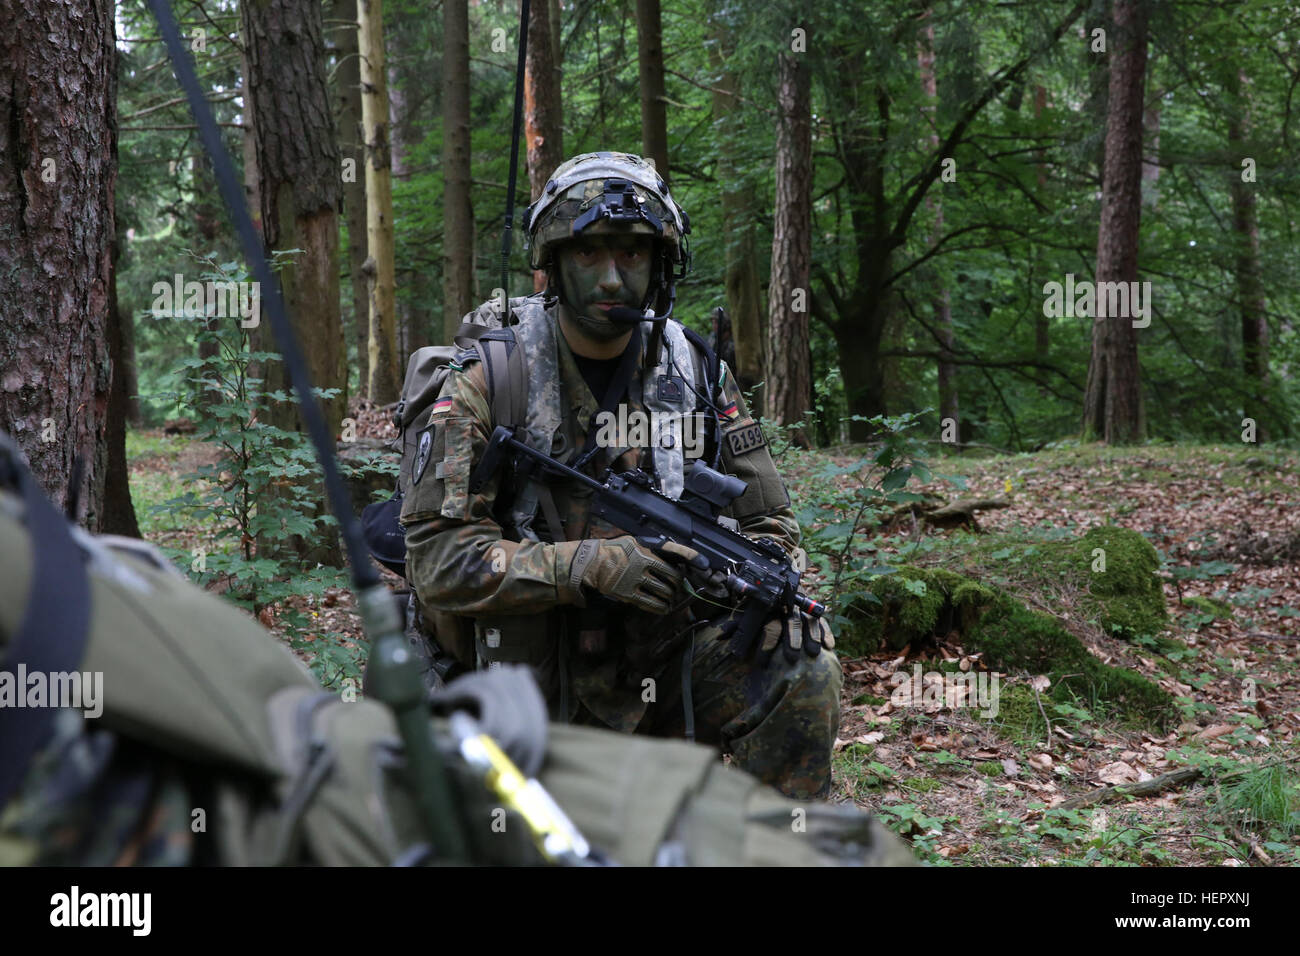 A German Bundeswehr soldier of 4th Paratrooper Company, 31st Paratrooper Regiment, provides security while conducting a dismounted patrol during Swift Response 16 training exercise at the Hohenfels Training Area, a part of the Joint Multinational Readiness Center, in Hohenfels, Germany, Jun. 21, 2016. Exercise Swift Response is one of the premier military crisis response training events for multi-national airborne forces in the world. The exercise is designed to enhance the readiness of the combat core of the U.S. Global Response Force – currently the 82nd Airborne Division’s 1st Brigade Comba Stock Photo